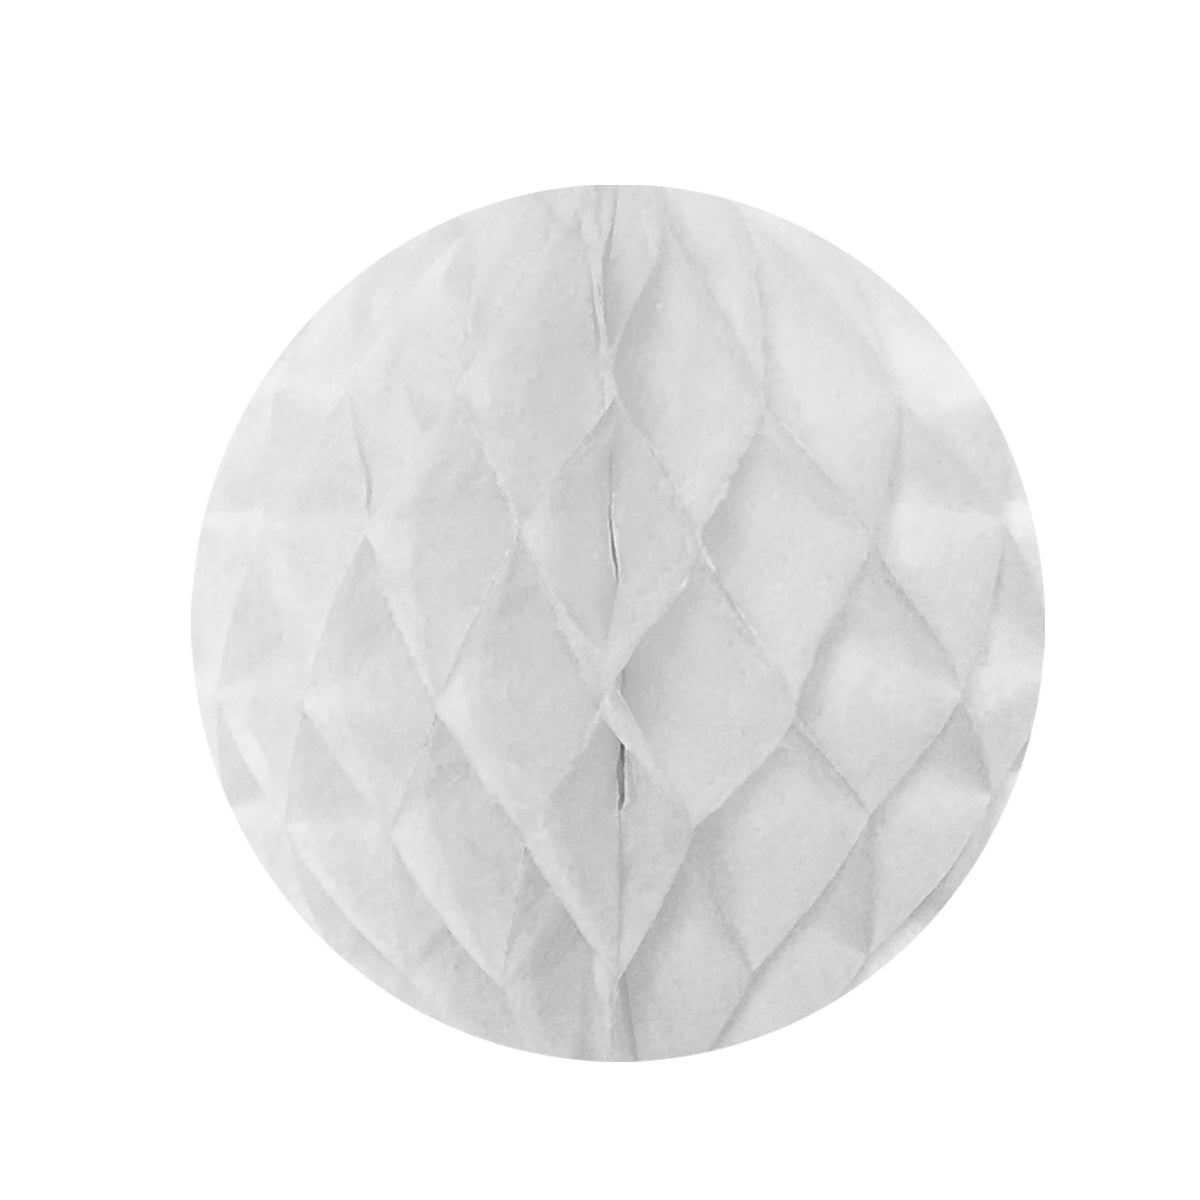 Wrapables 14" Set of 2 Tissue Honeycomb Ball Party Decorations